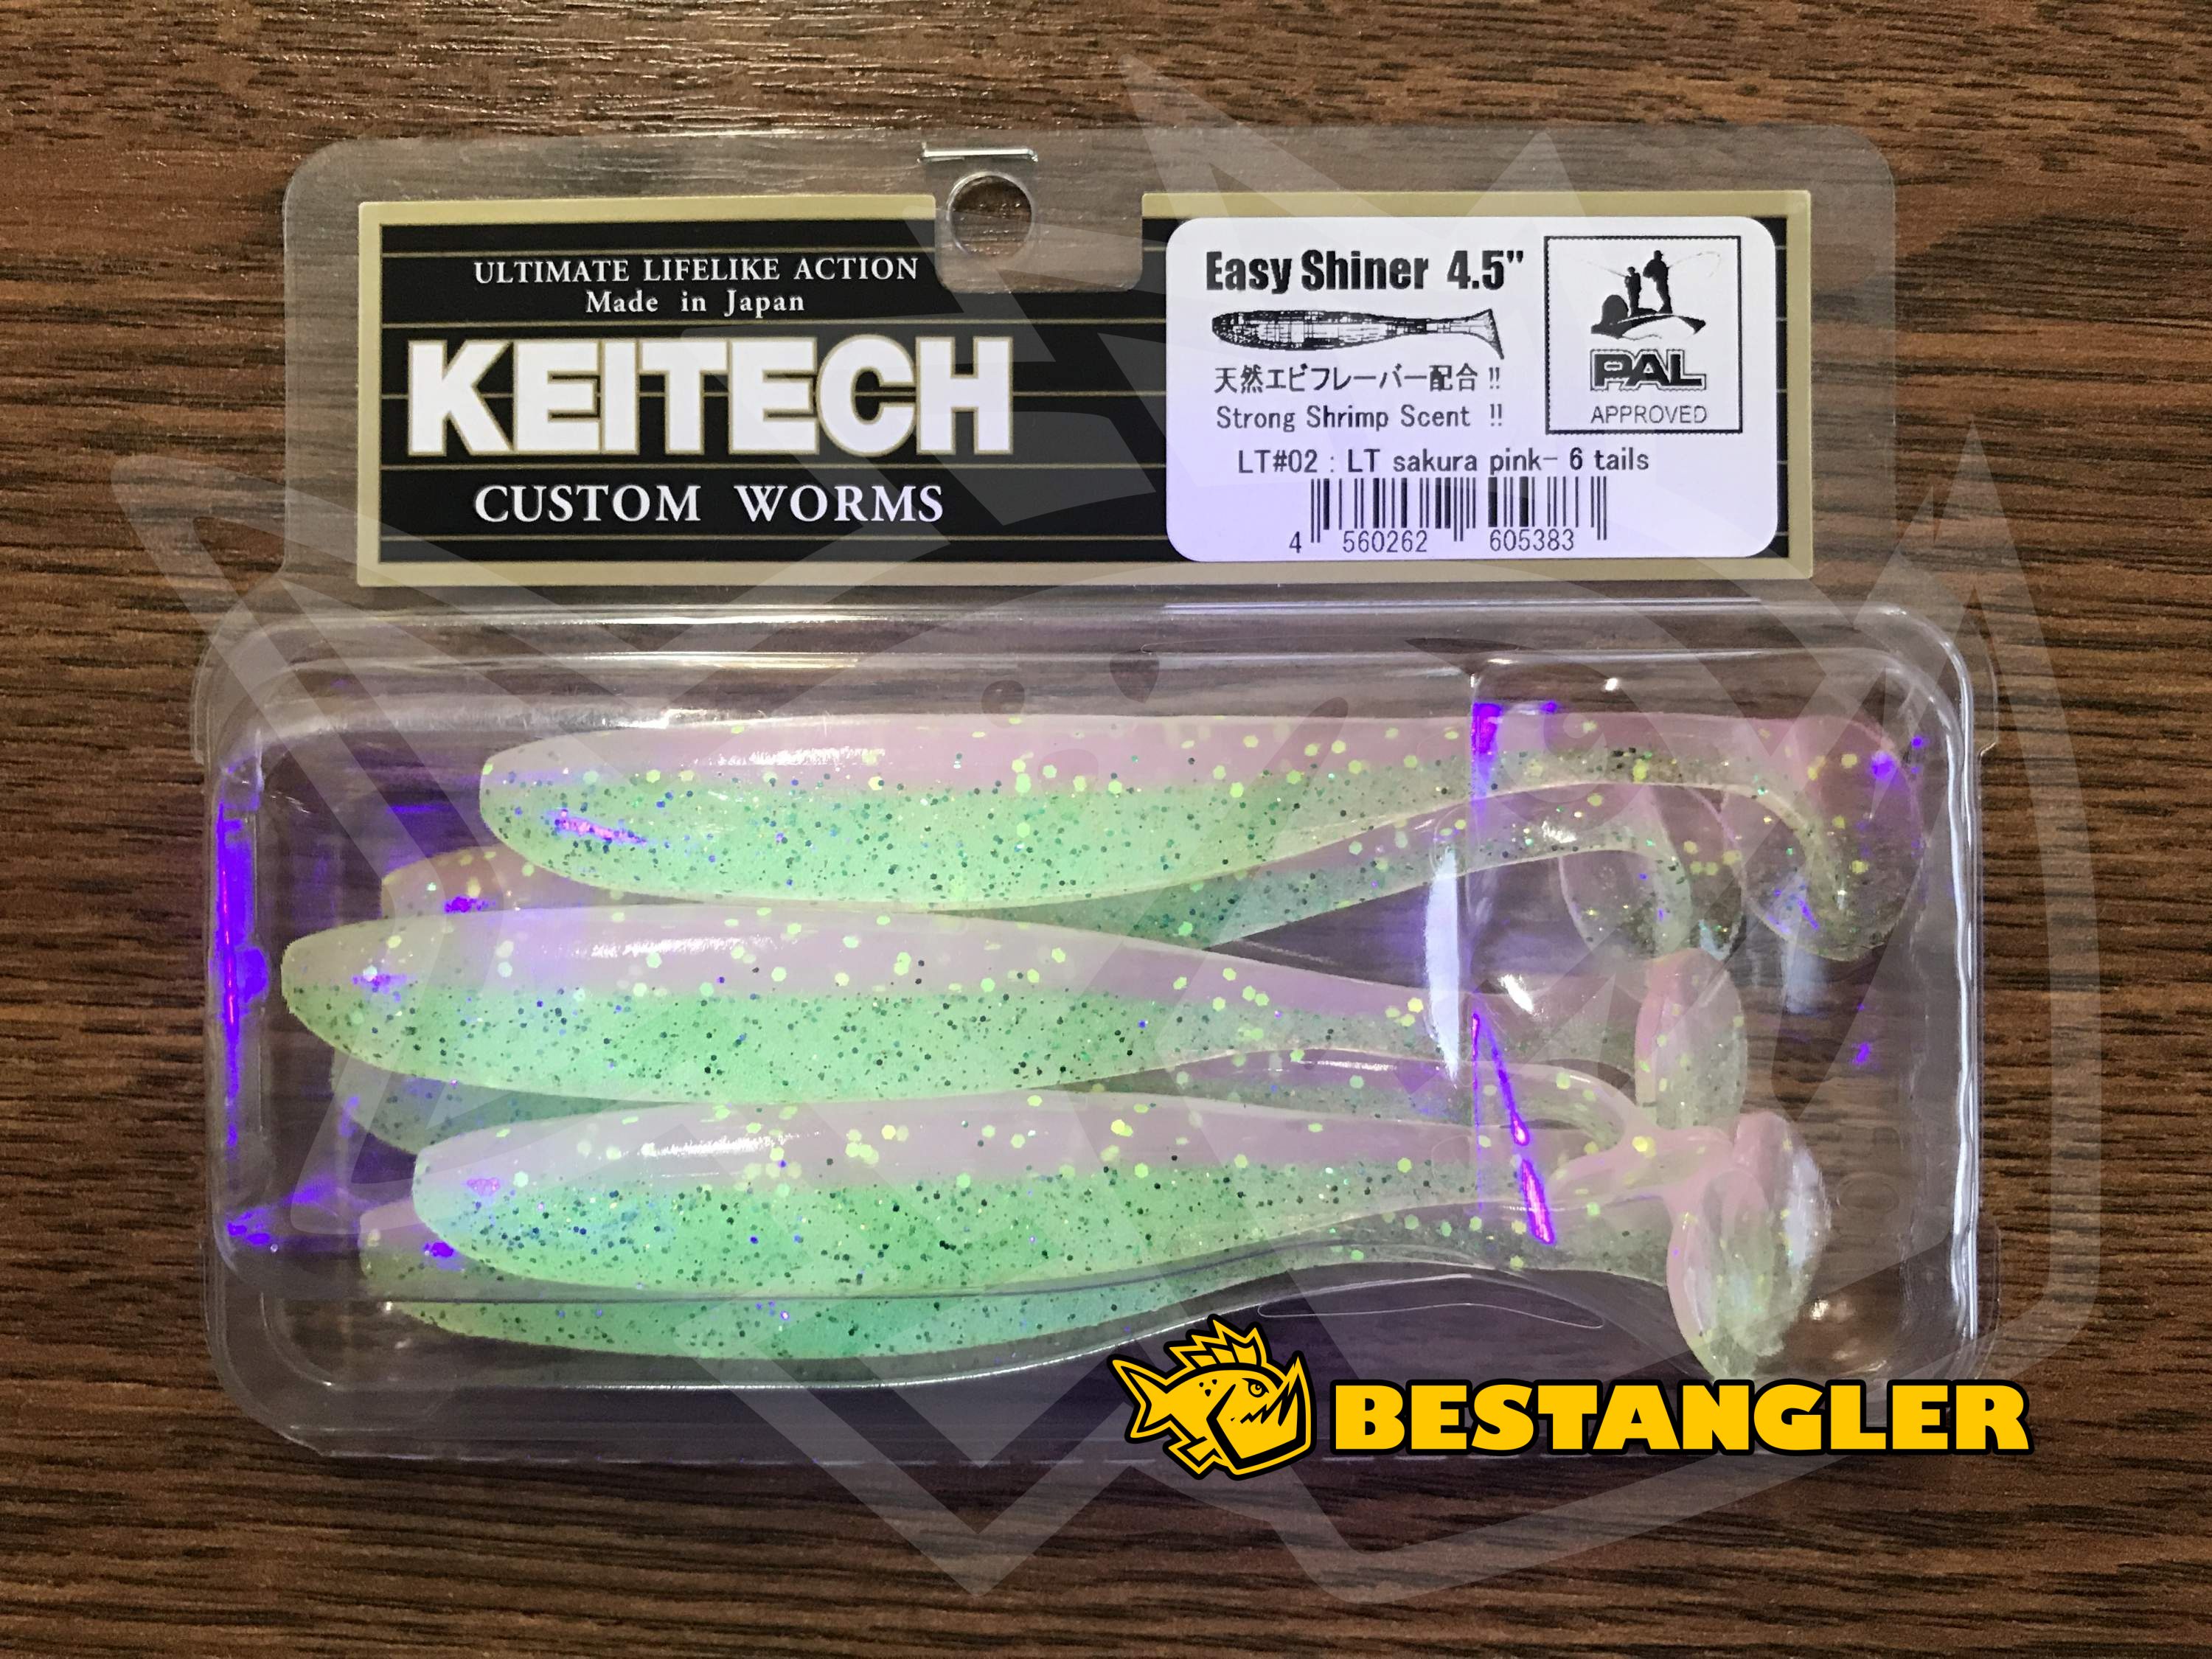 Keitech Easy Shiner 4 Purple Chartreuse